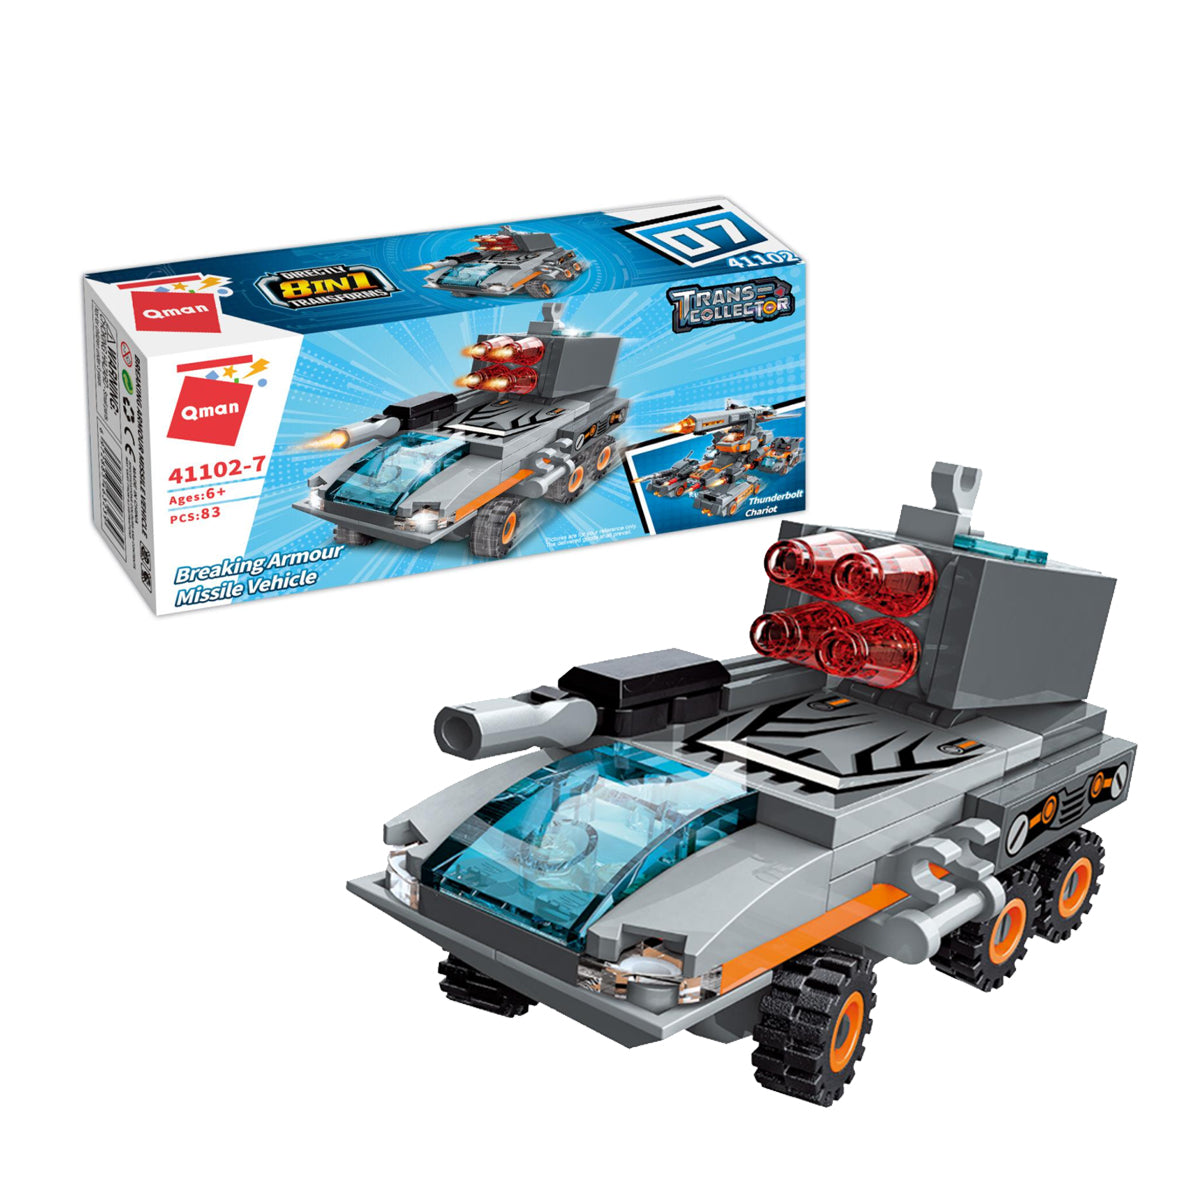 Qman Trans-Collector Thunderbolt Chariot 8 in 1: Breaking Armour Missile Vehicle (7681412989152)